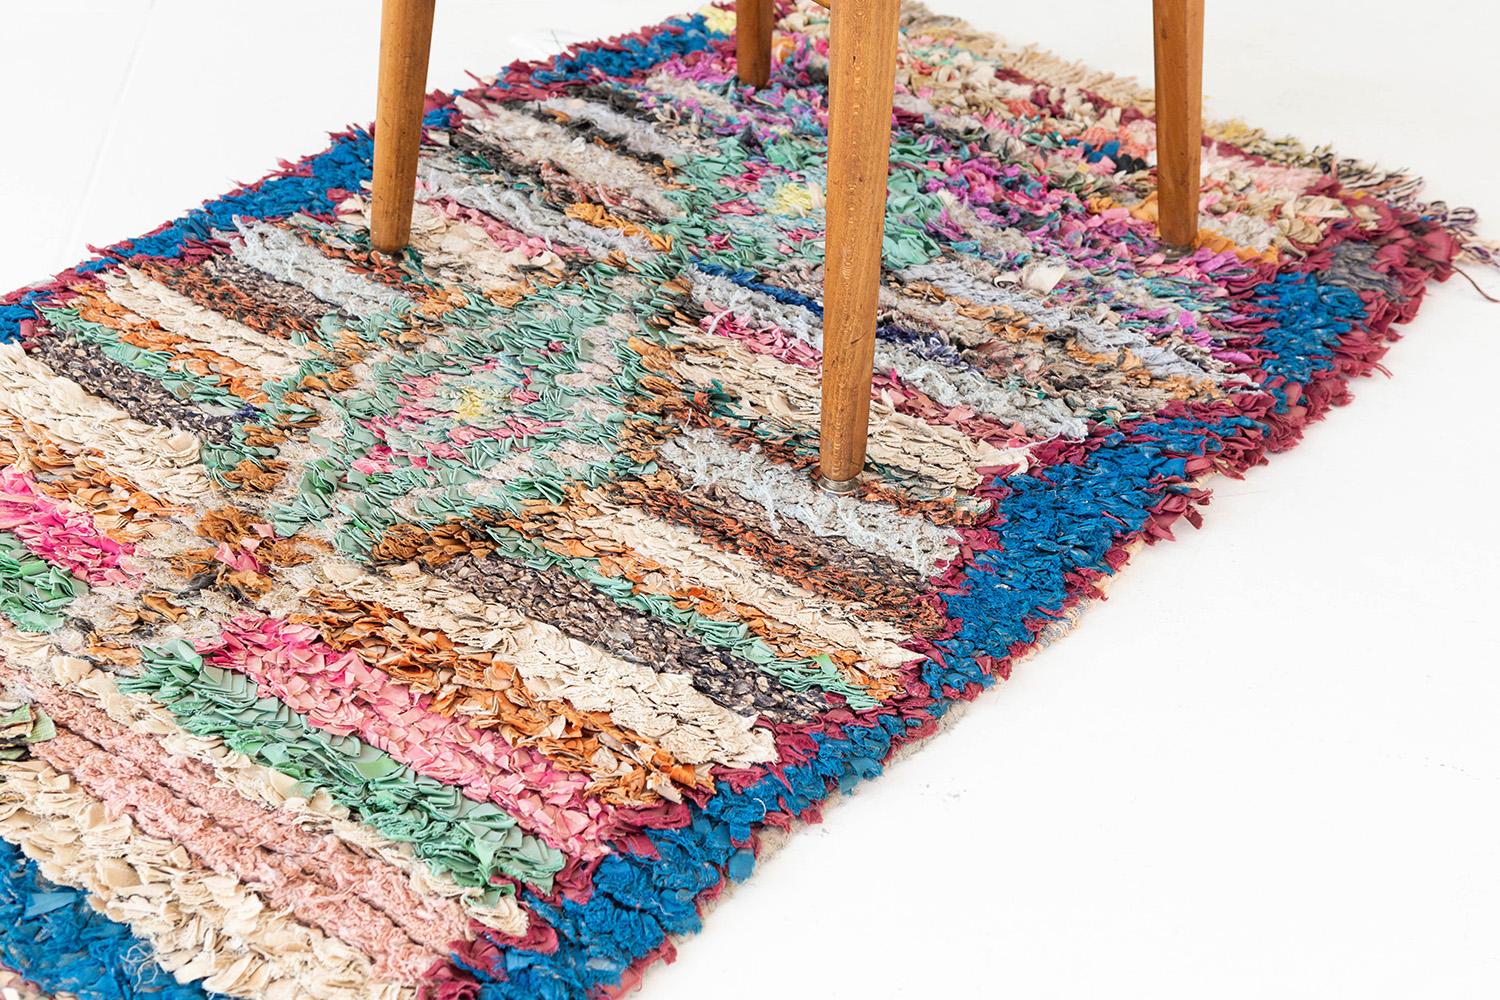 Stripes, zigzags, and central diamond motifs in a spirited array of colors including brilliant blue, burgundy, apricot, pale golden yellow, and white. The pile is composed of ribbon-like recycled textiles. A cheerful vintage ribbon-rug from the